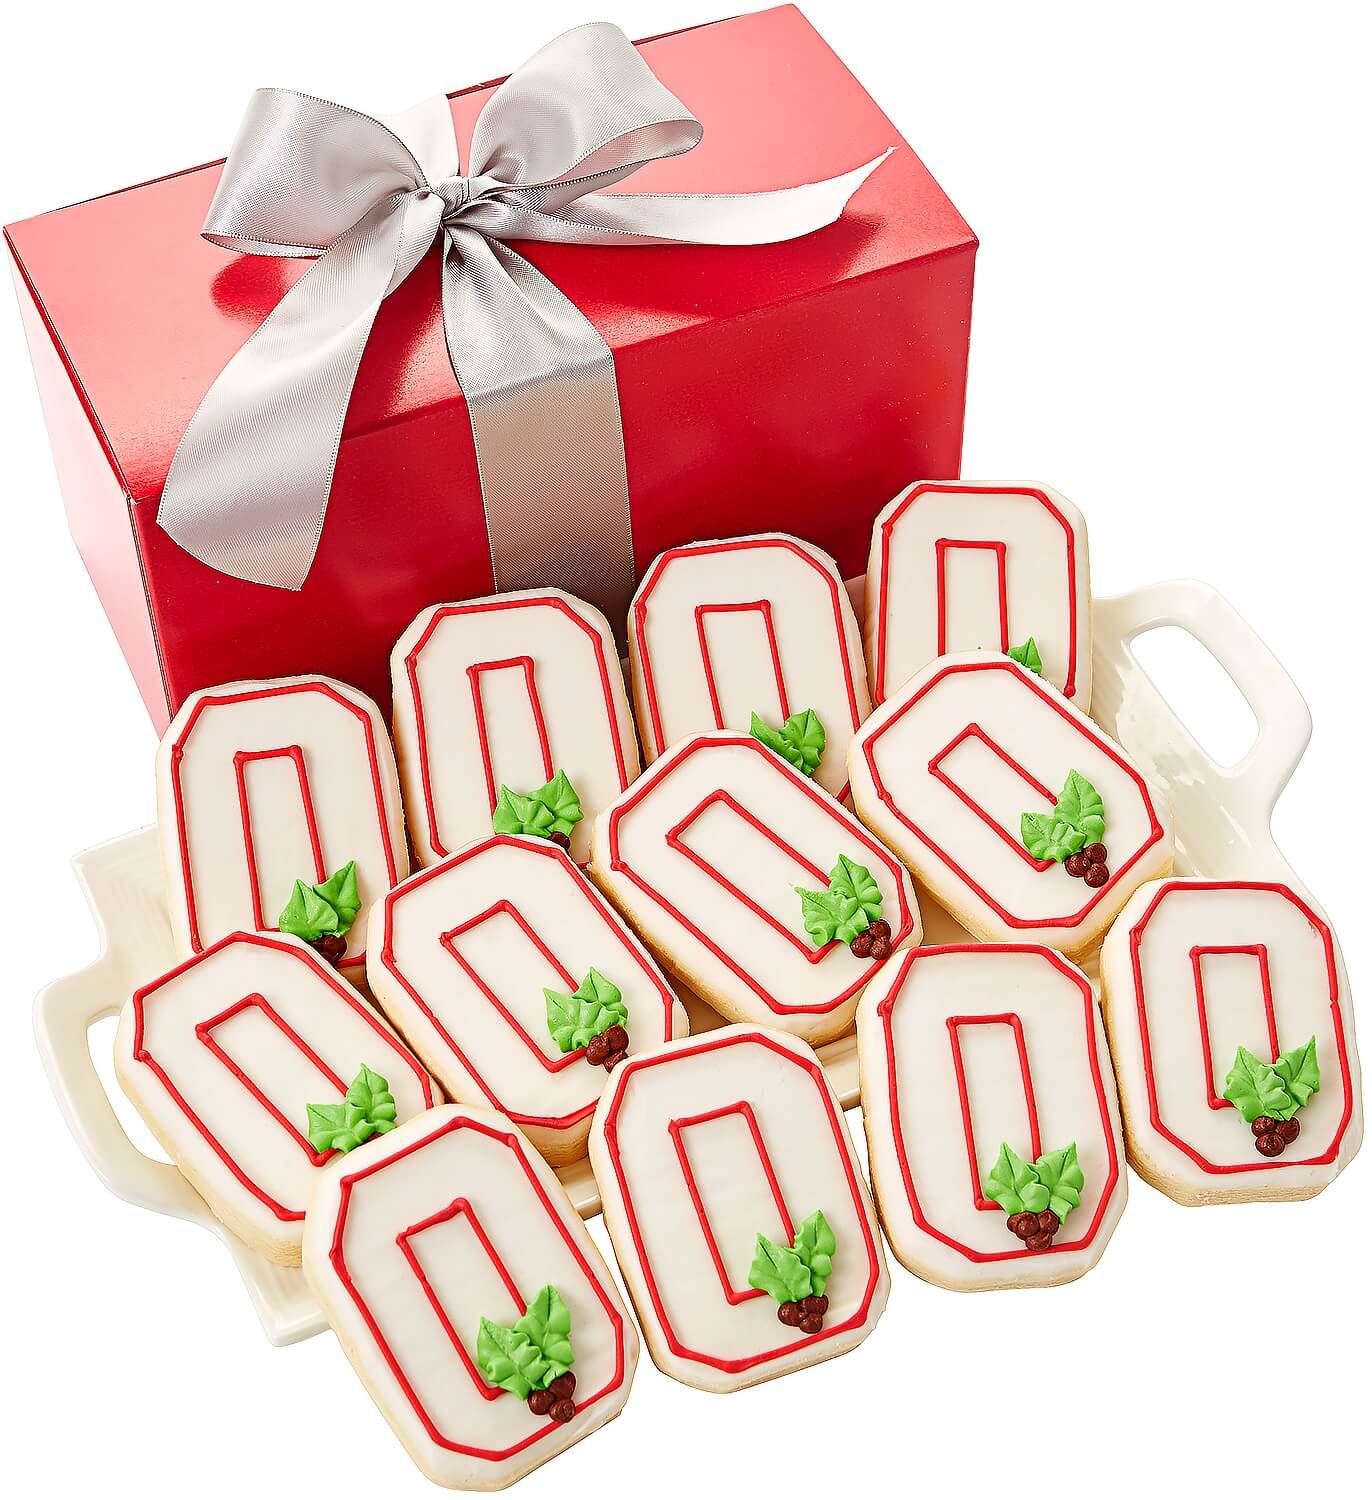 Ohio State University Licensed Block O Cookies Box - Cookie Bouquets